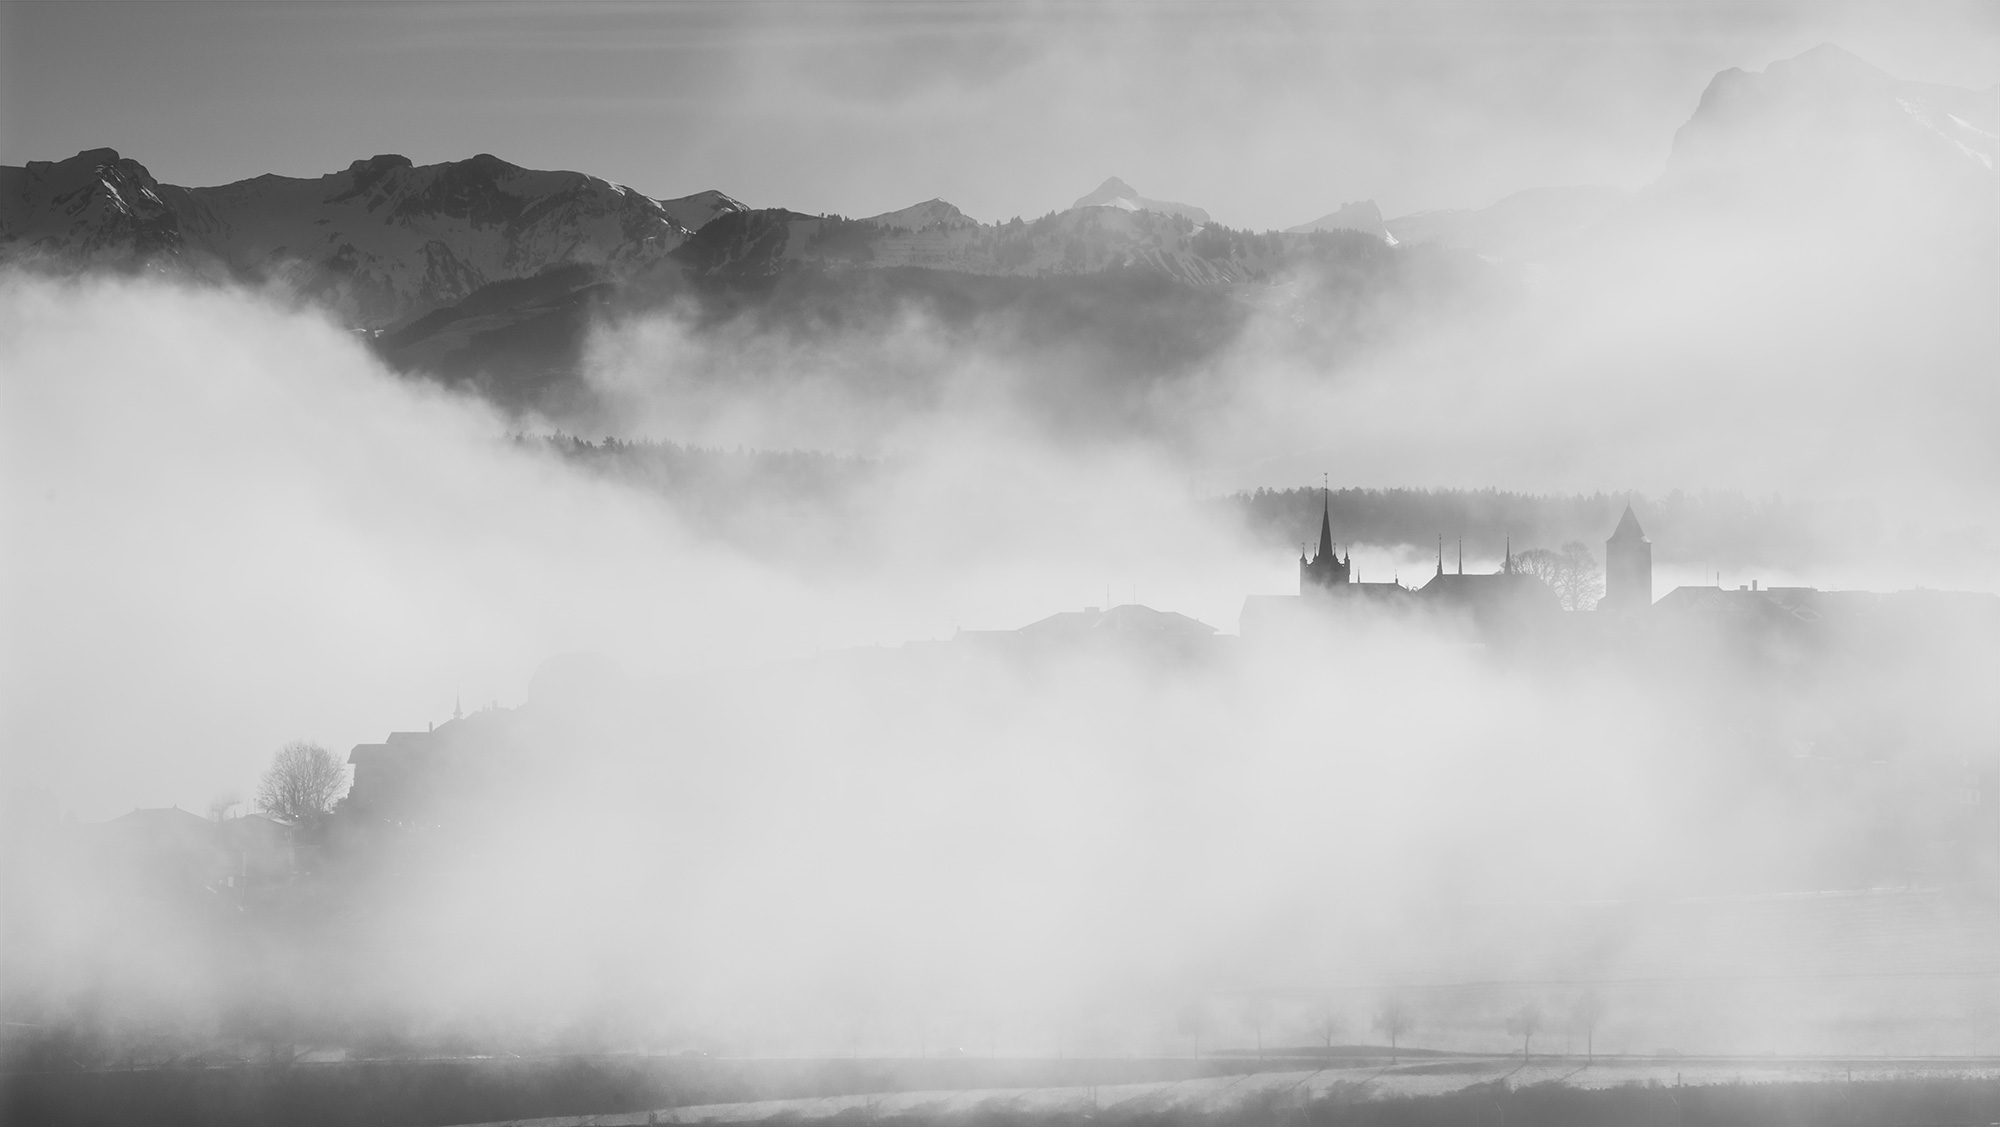 Swiss artist Jennifer Esseiva, wielding her Nikon Z8, presents a captivating black and white landscape photograph capturing the city of Romont in the fog. This mesmerizing scene unfolds in the countryside of Canton Fribourg, Switzerland. Explore the subtle beauty of the mist-shrouded landscape through Jennifer's lens.